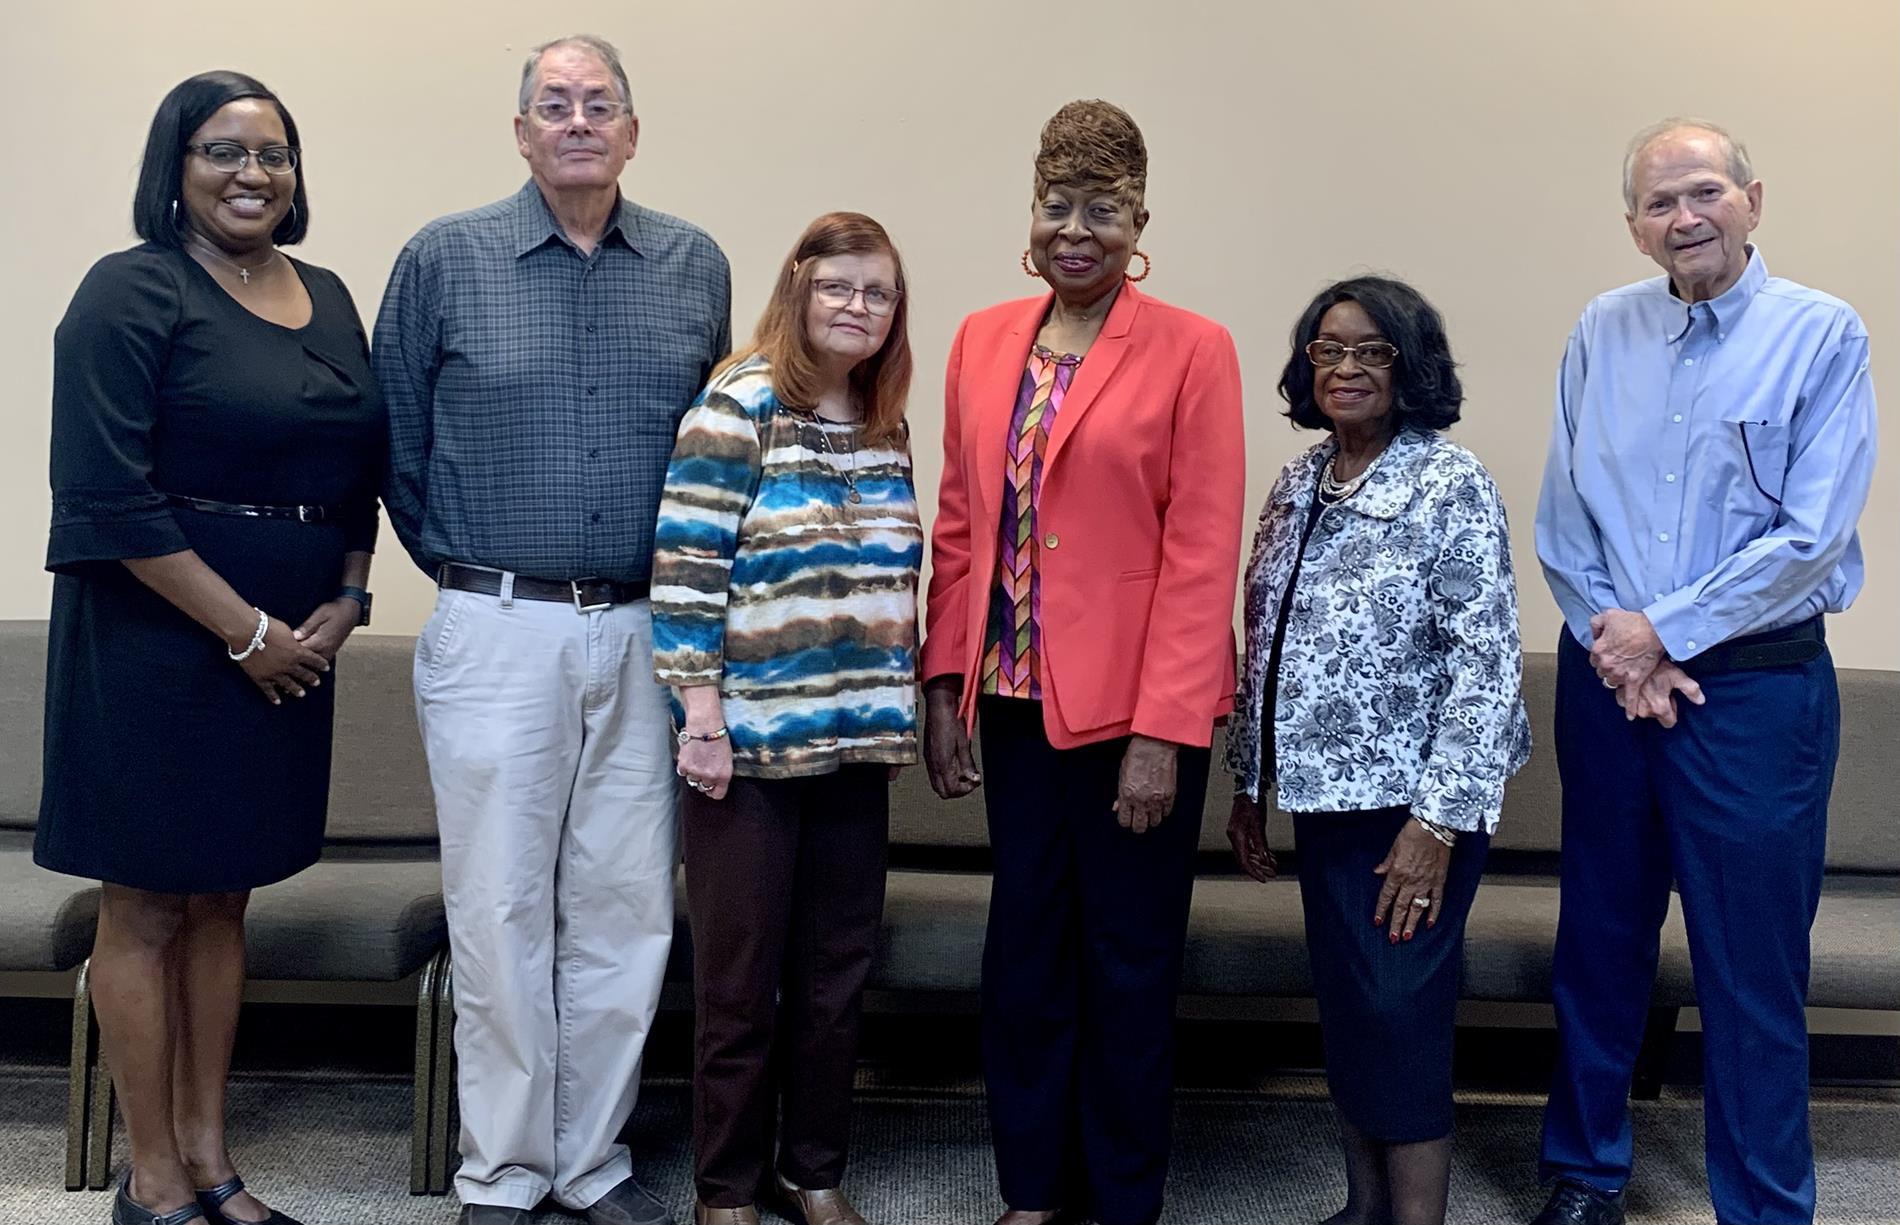 This is a group picture of the school board. Pictured from Left to Right:  Superintendent Jennifer Boyd, David Gagnon, Gail Holley, Gwen Harris-Brooks, Katie Walton, and Tony Edmondson